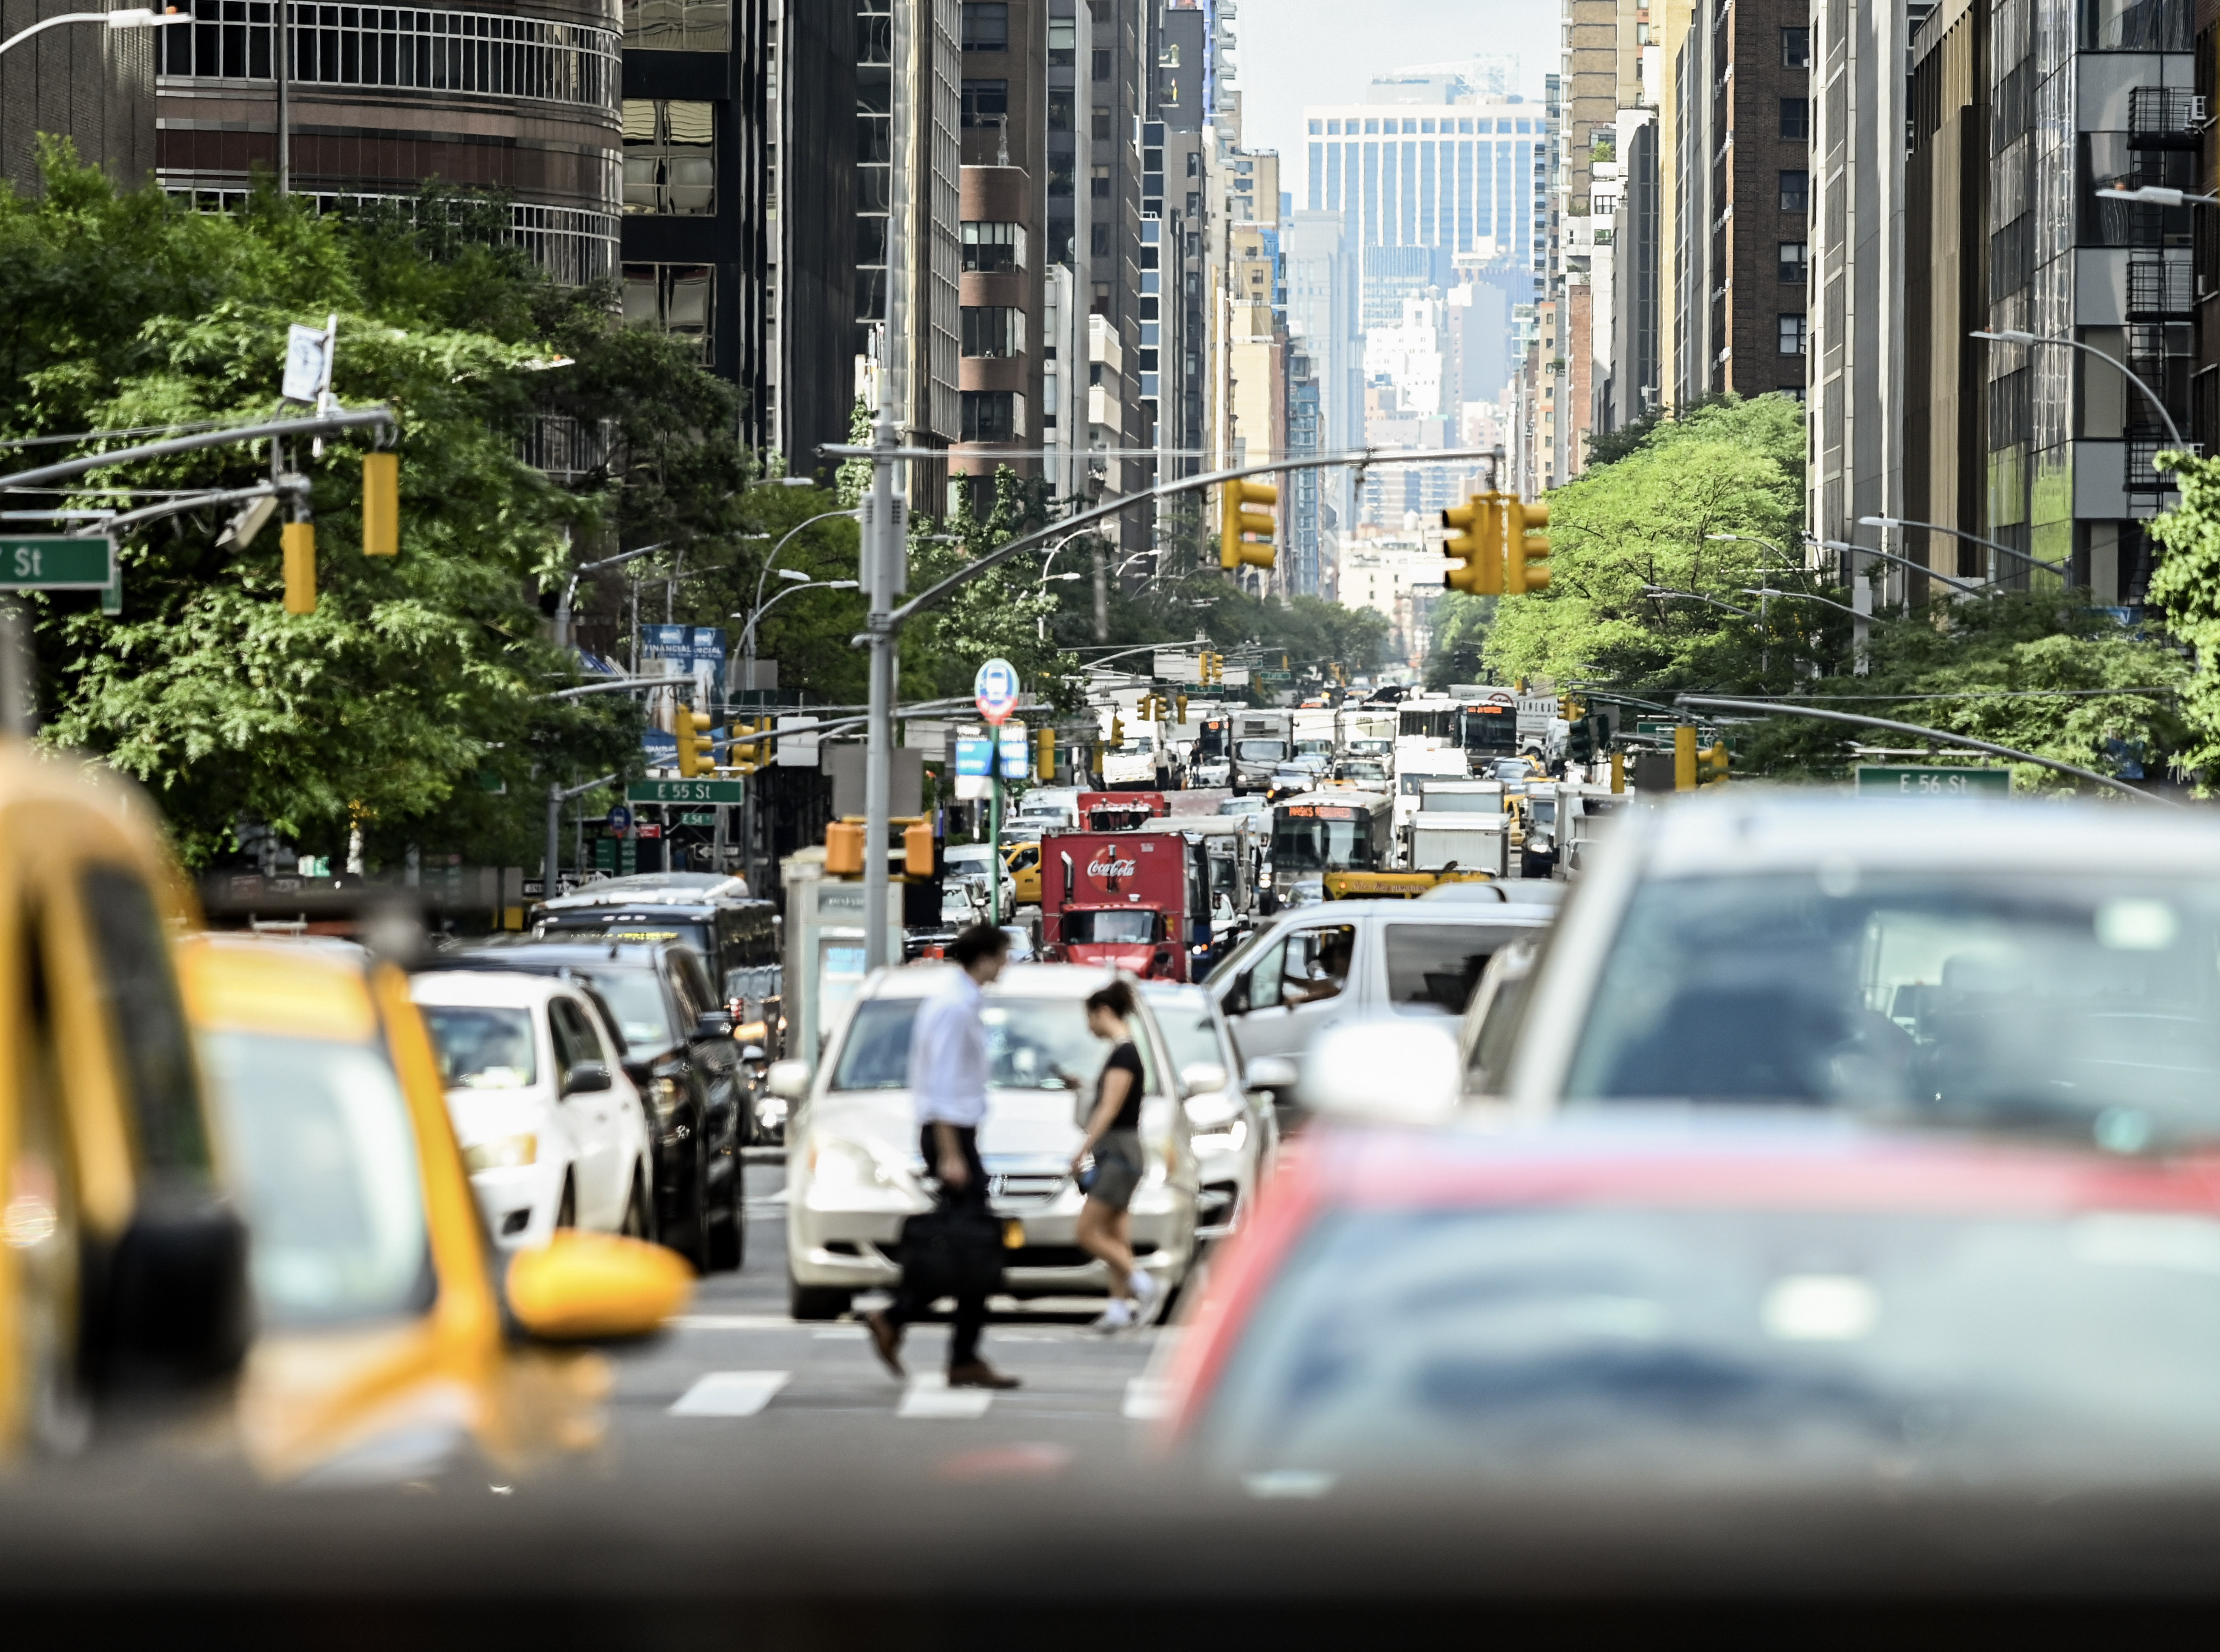 Reminder: Public Hearings on the Proposed Congestion Pricing Program Begin This Thursday, Aug. 25